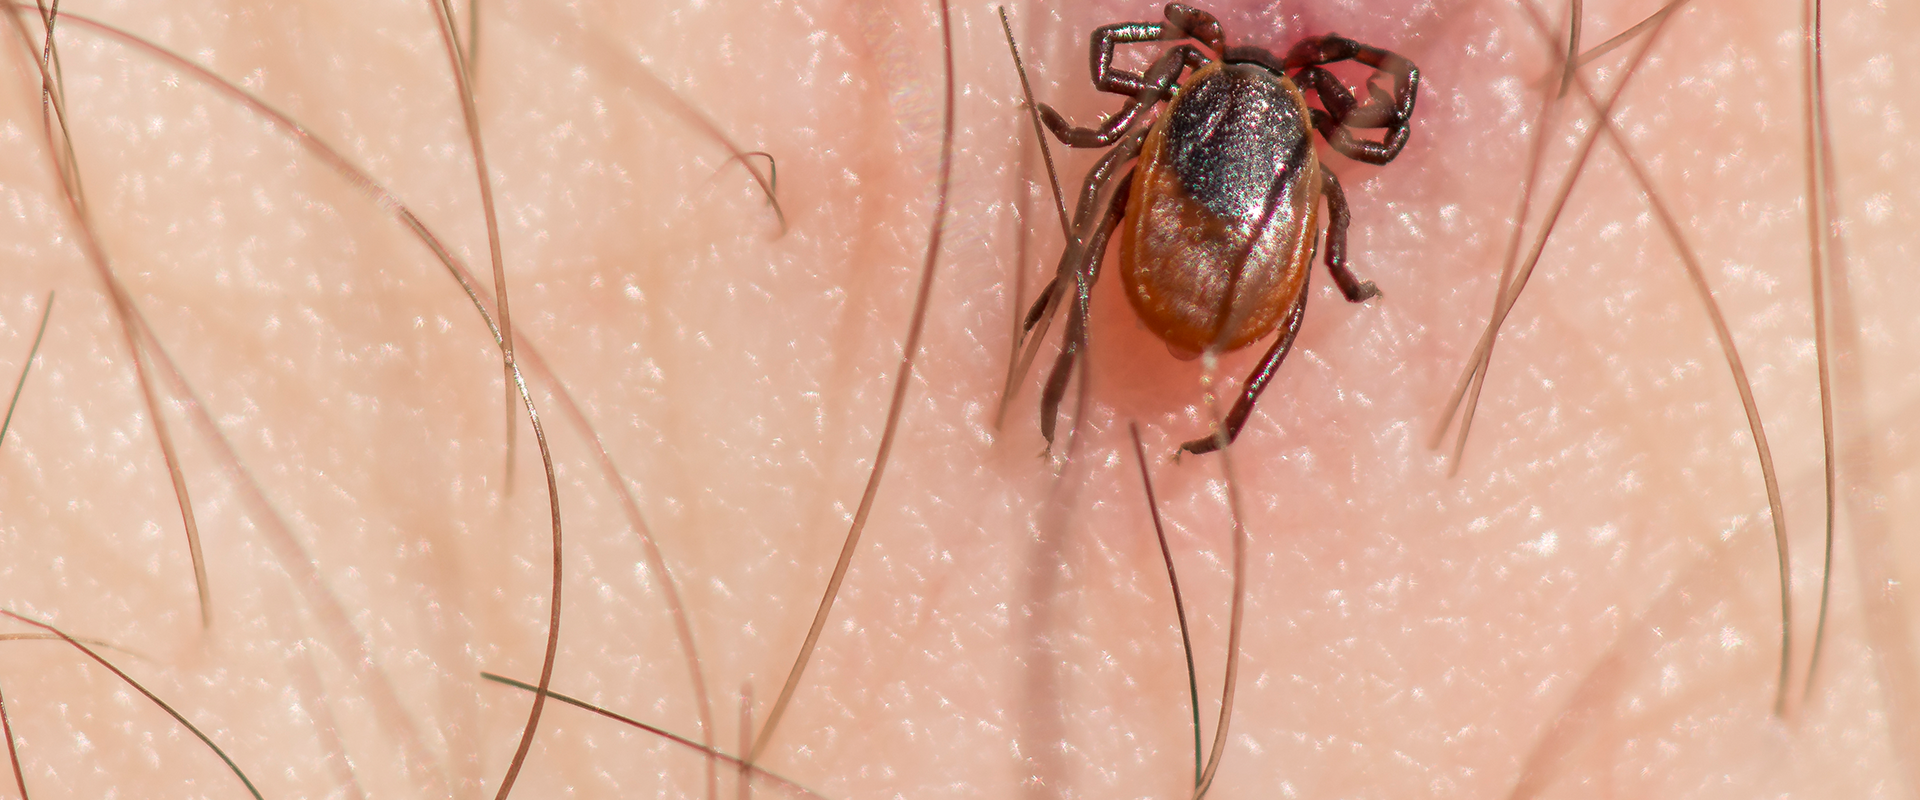 washington dc man with a tick in his stomach